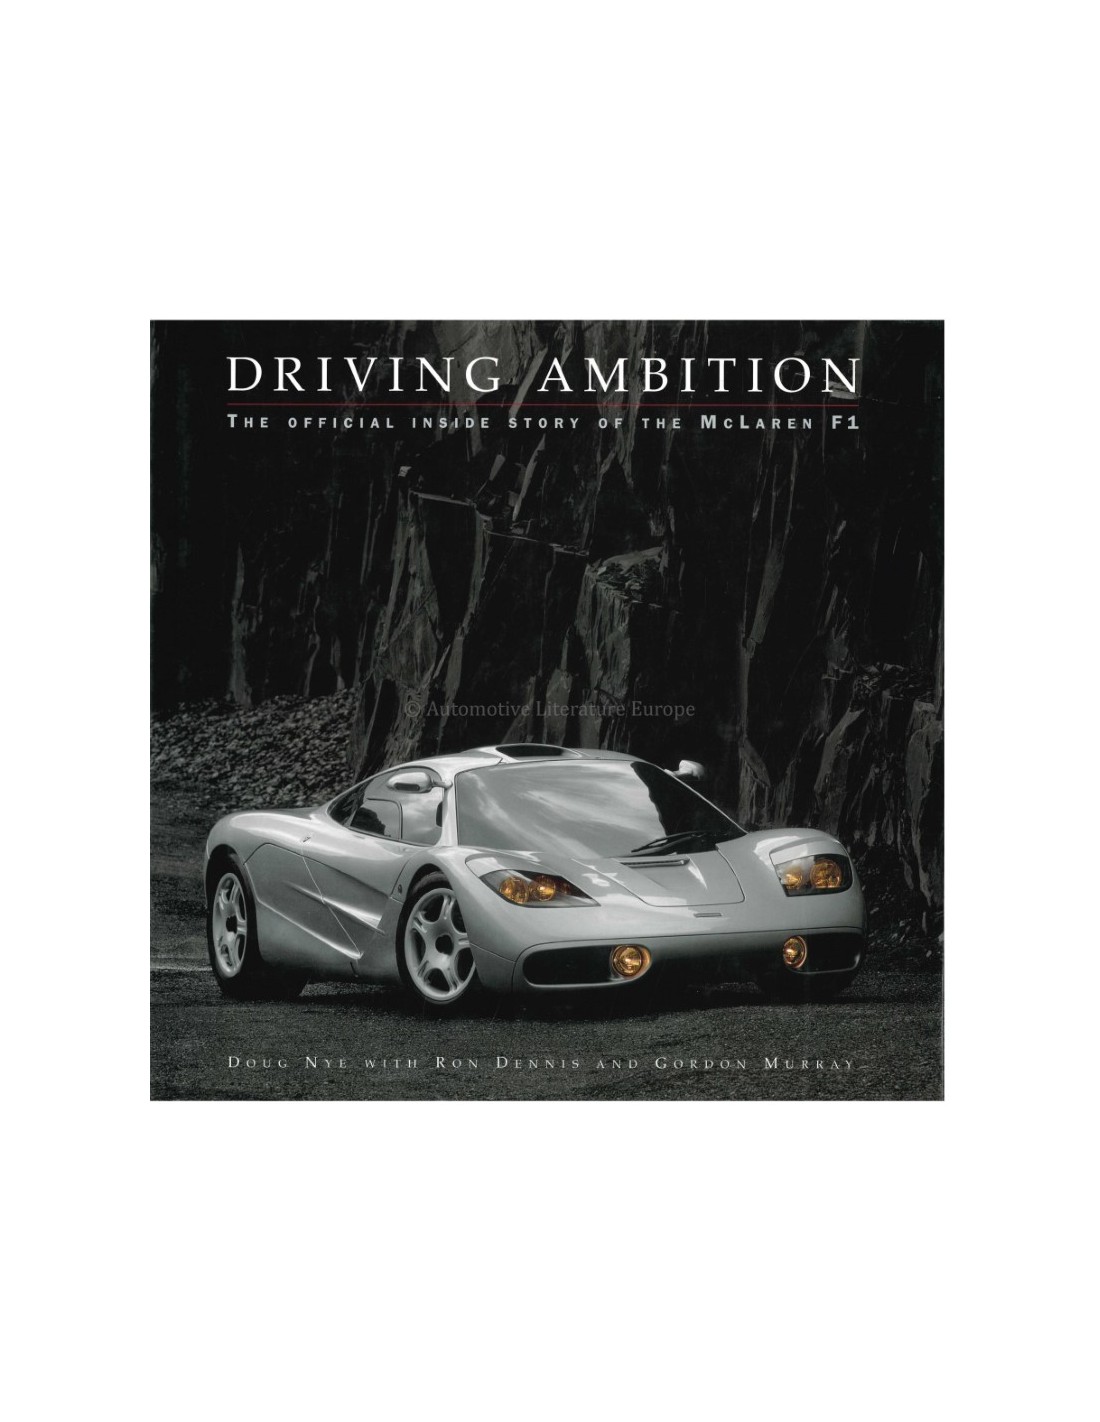 McLaren F1 LM + Gordon Murray signed Copy of Driving Ambition